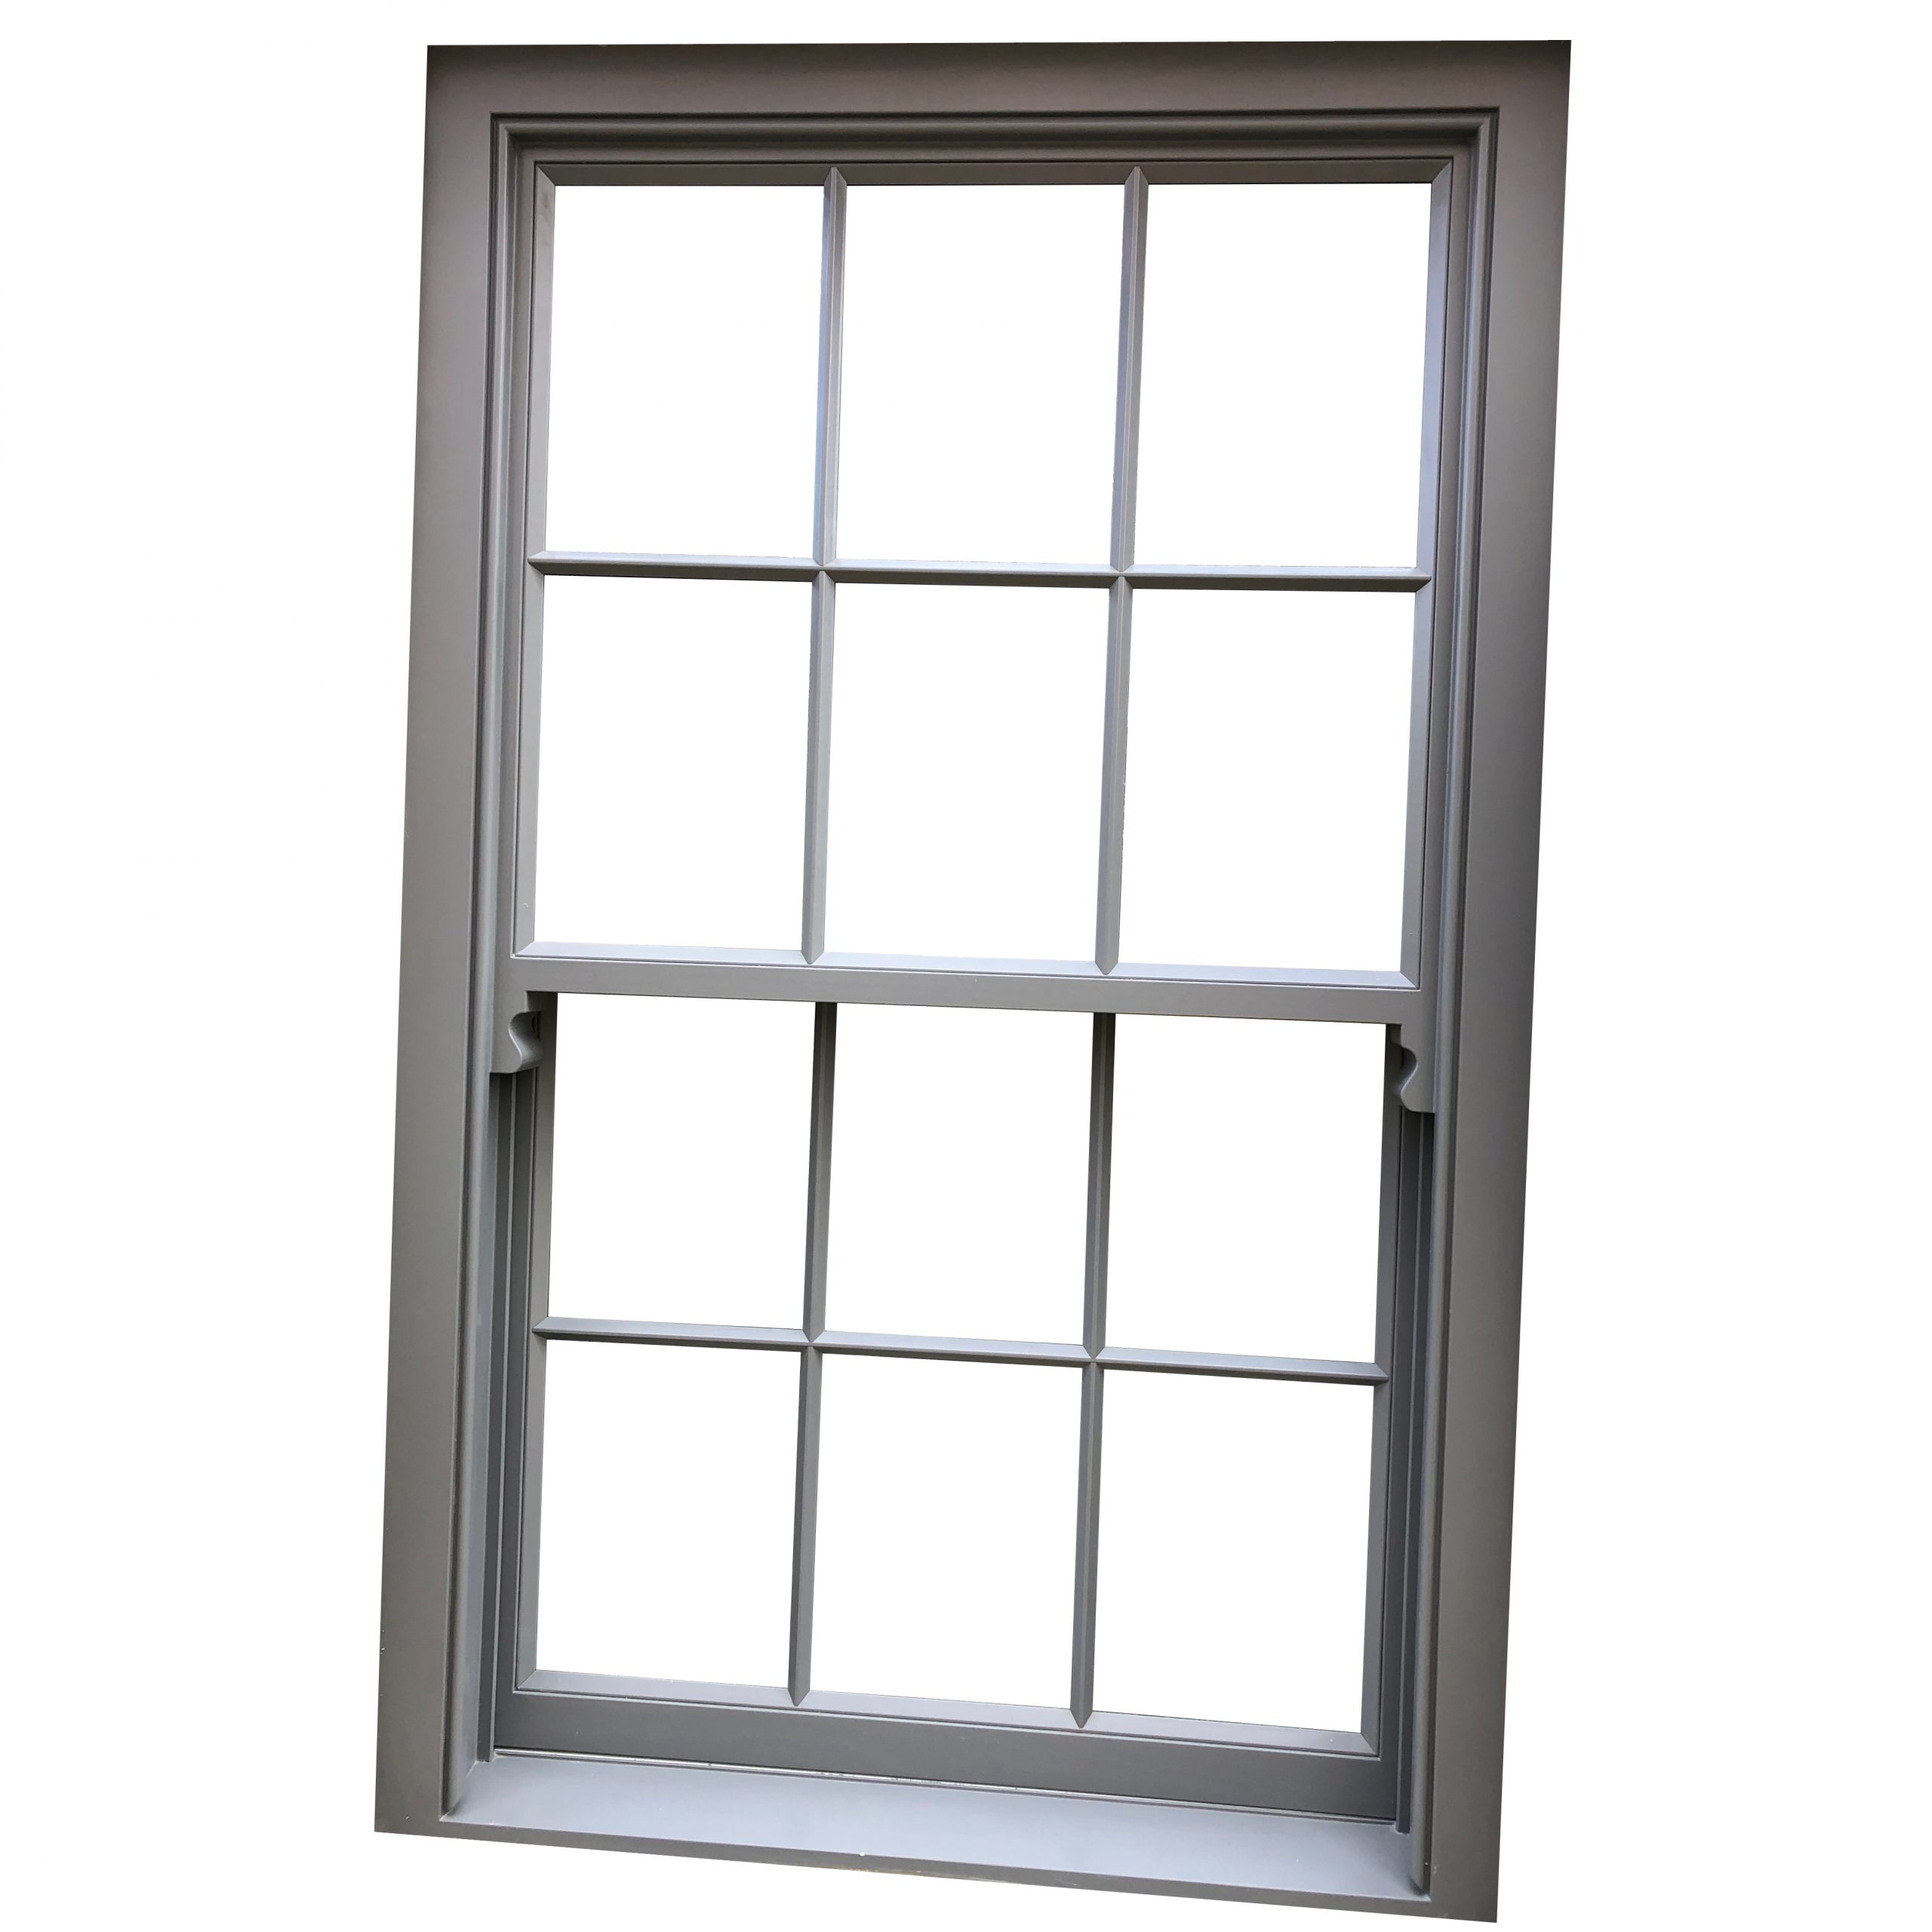 Goergian style sliding sash timber window by Collins and Hall